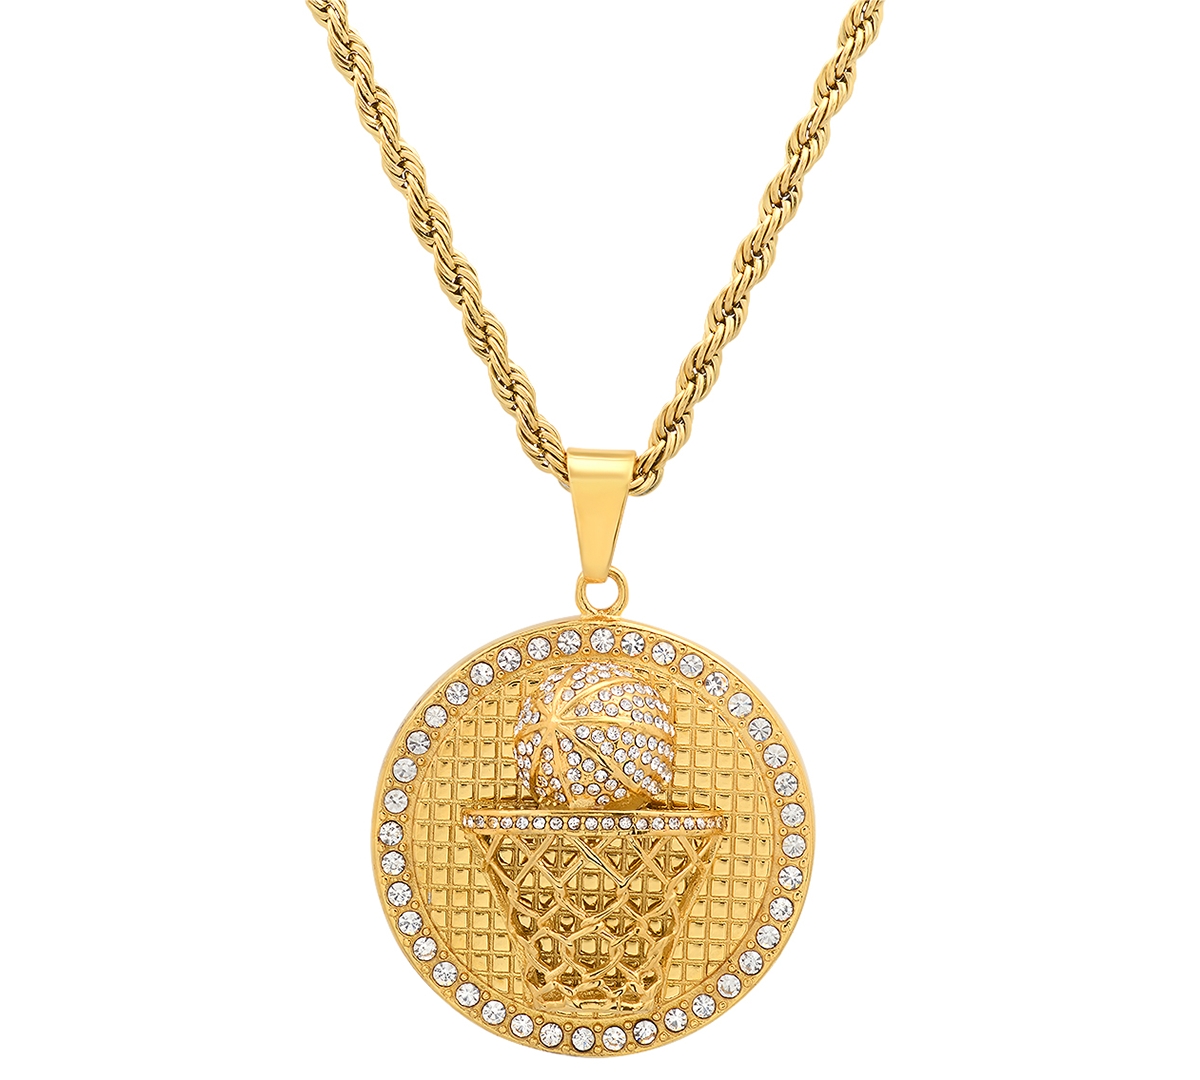 Men's 18k Gold-Plated Stainless Steel Simulated Diamond Basketball 24" Pendant Necklace - Gold